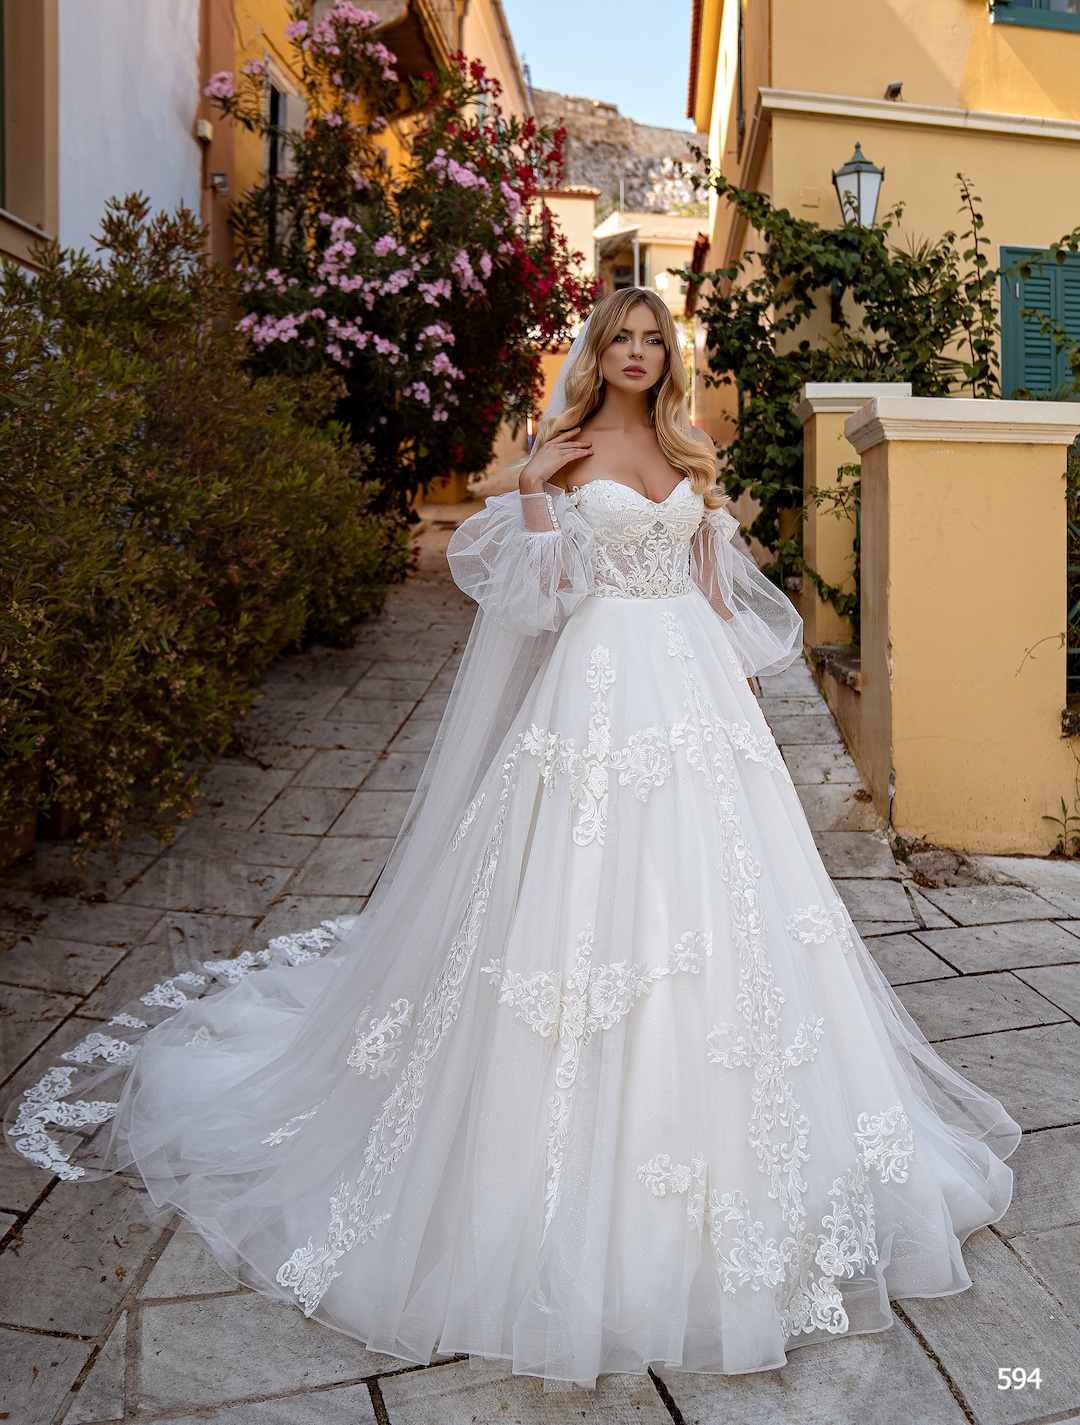 Dimei Lace Ball Gown Wedding Dresses Long Sleeve India | Ubuy